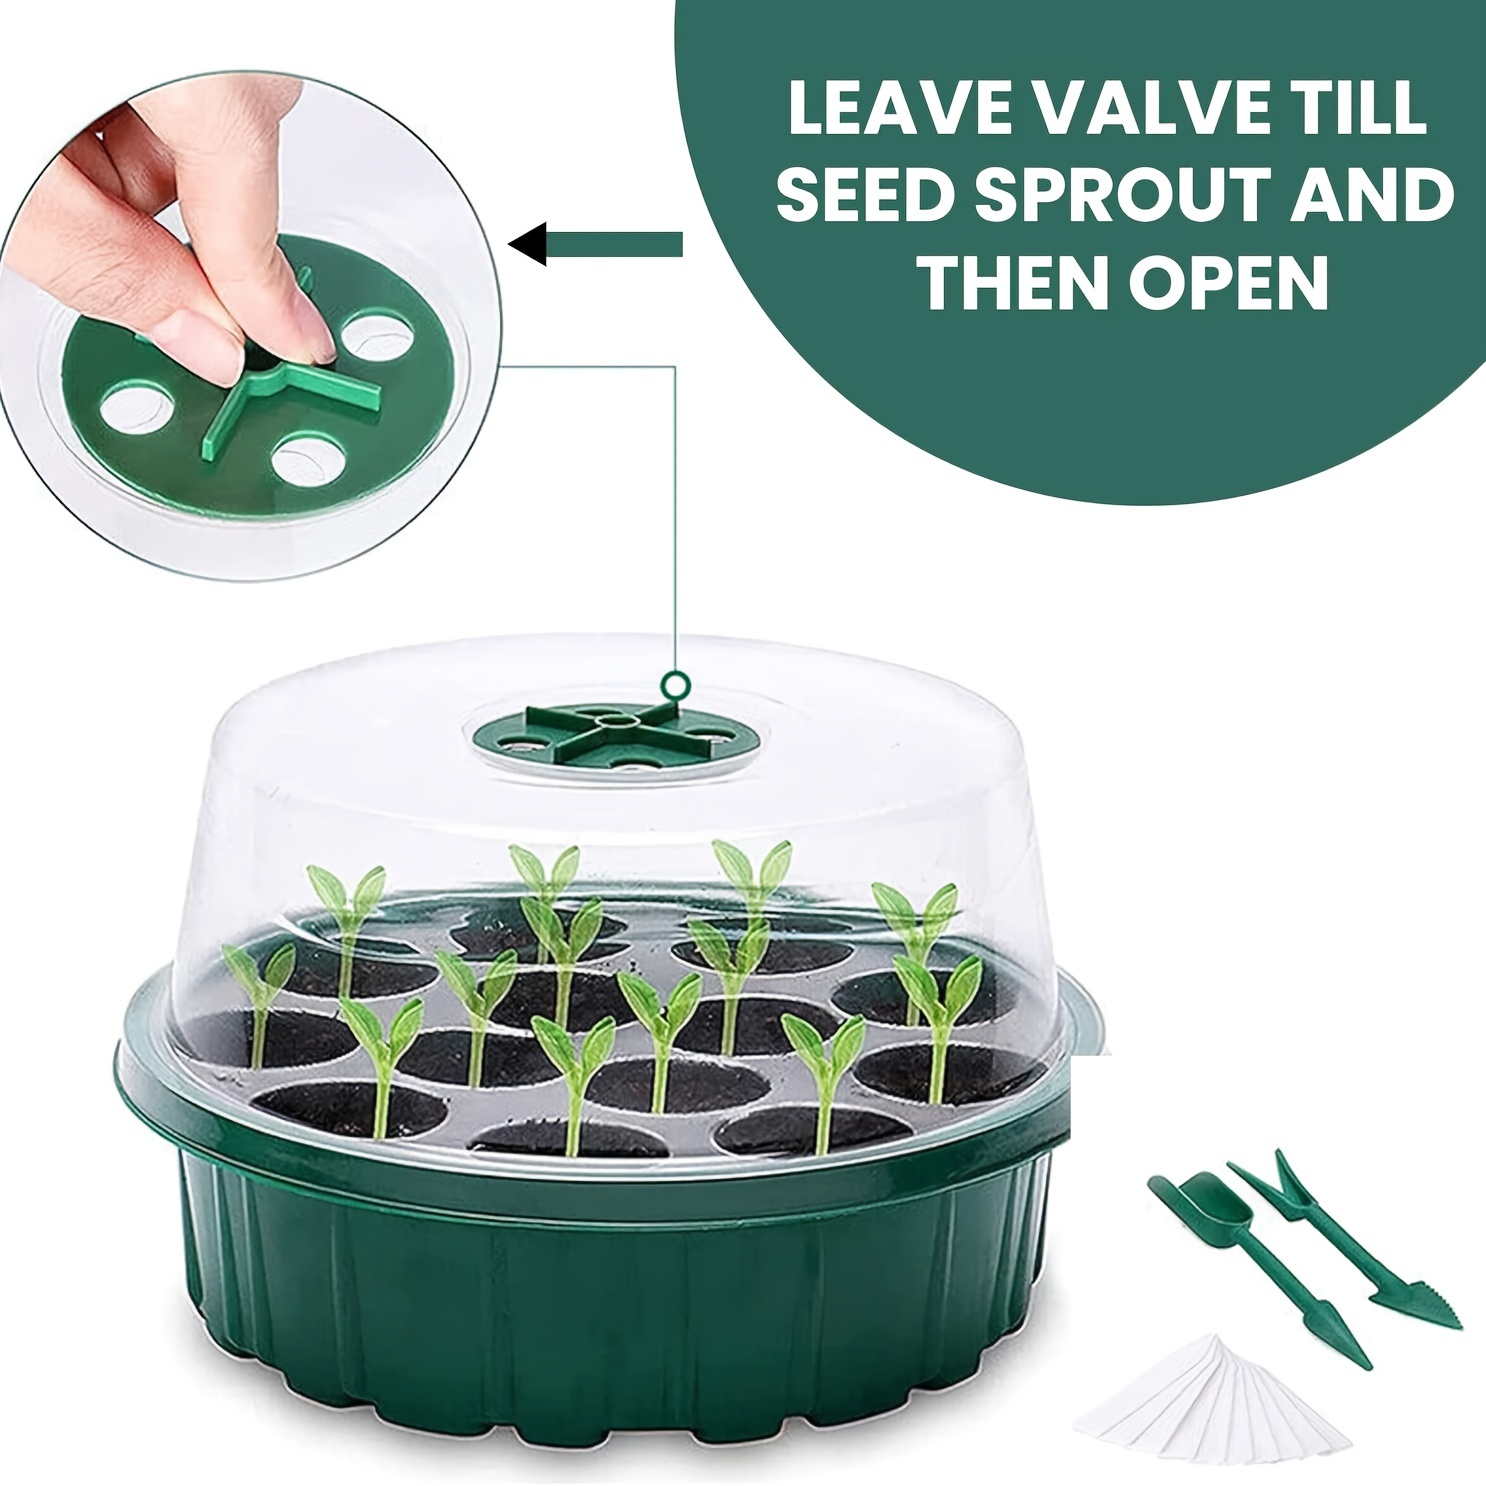 Seed Starter Tray, Reusable Seed Starter Kit, Silicone Seedling Starter Trays for Starting Plant Seeds, Seed Starting Trays with Flexible Pop-Out